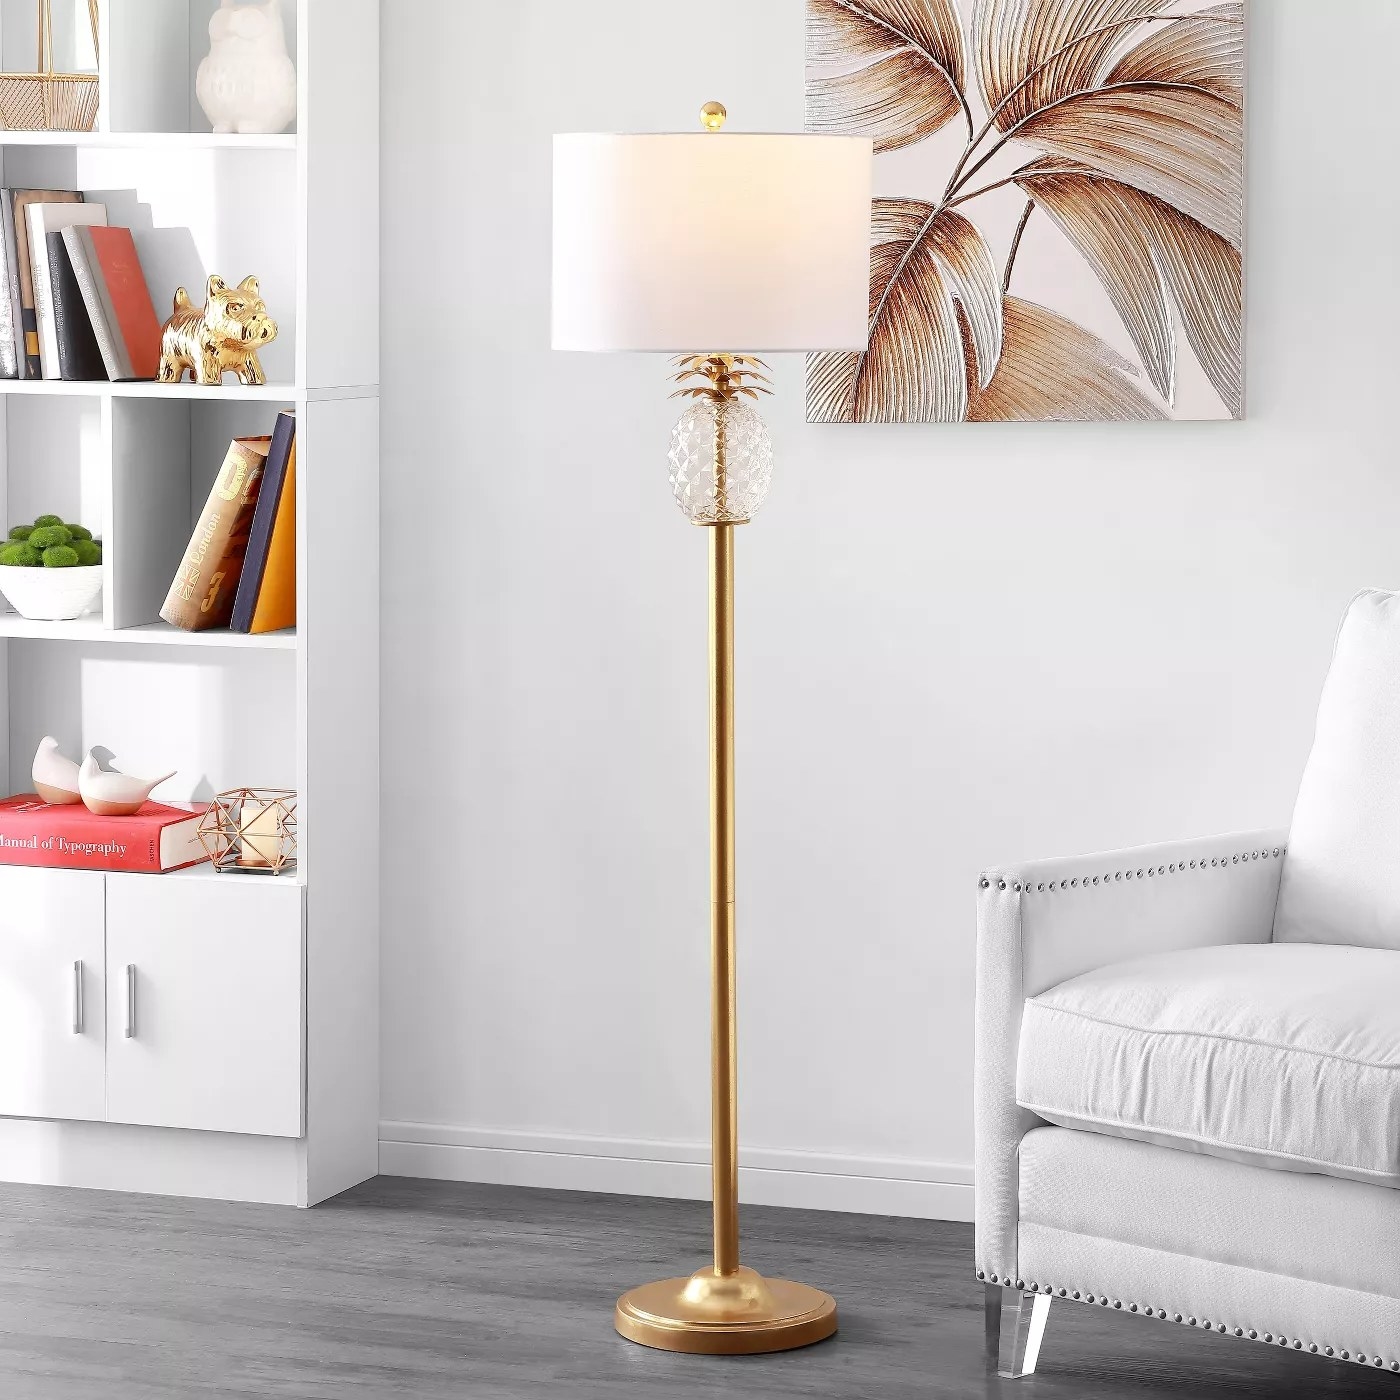 The gold floor lamp with a white shade and a glass pineapple